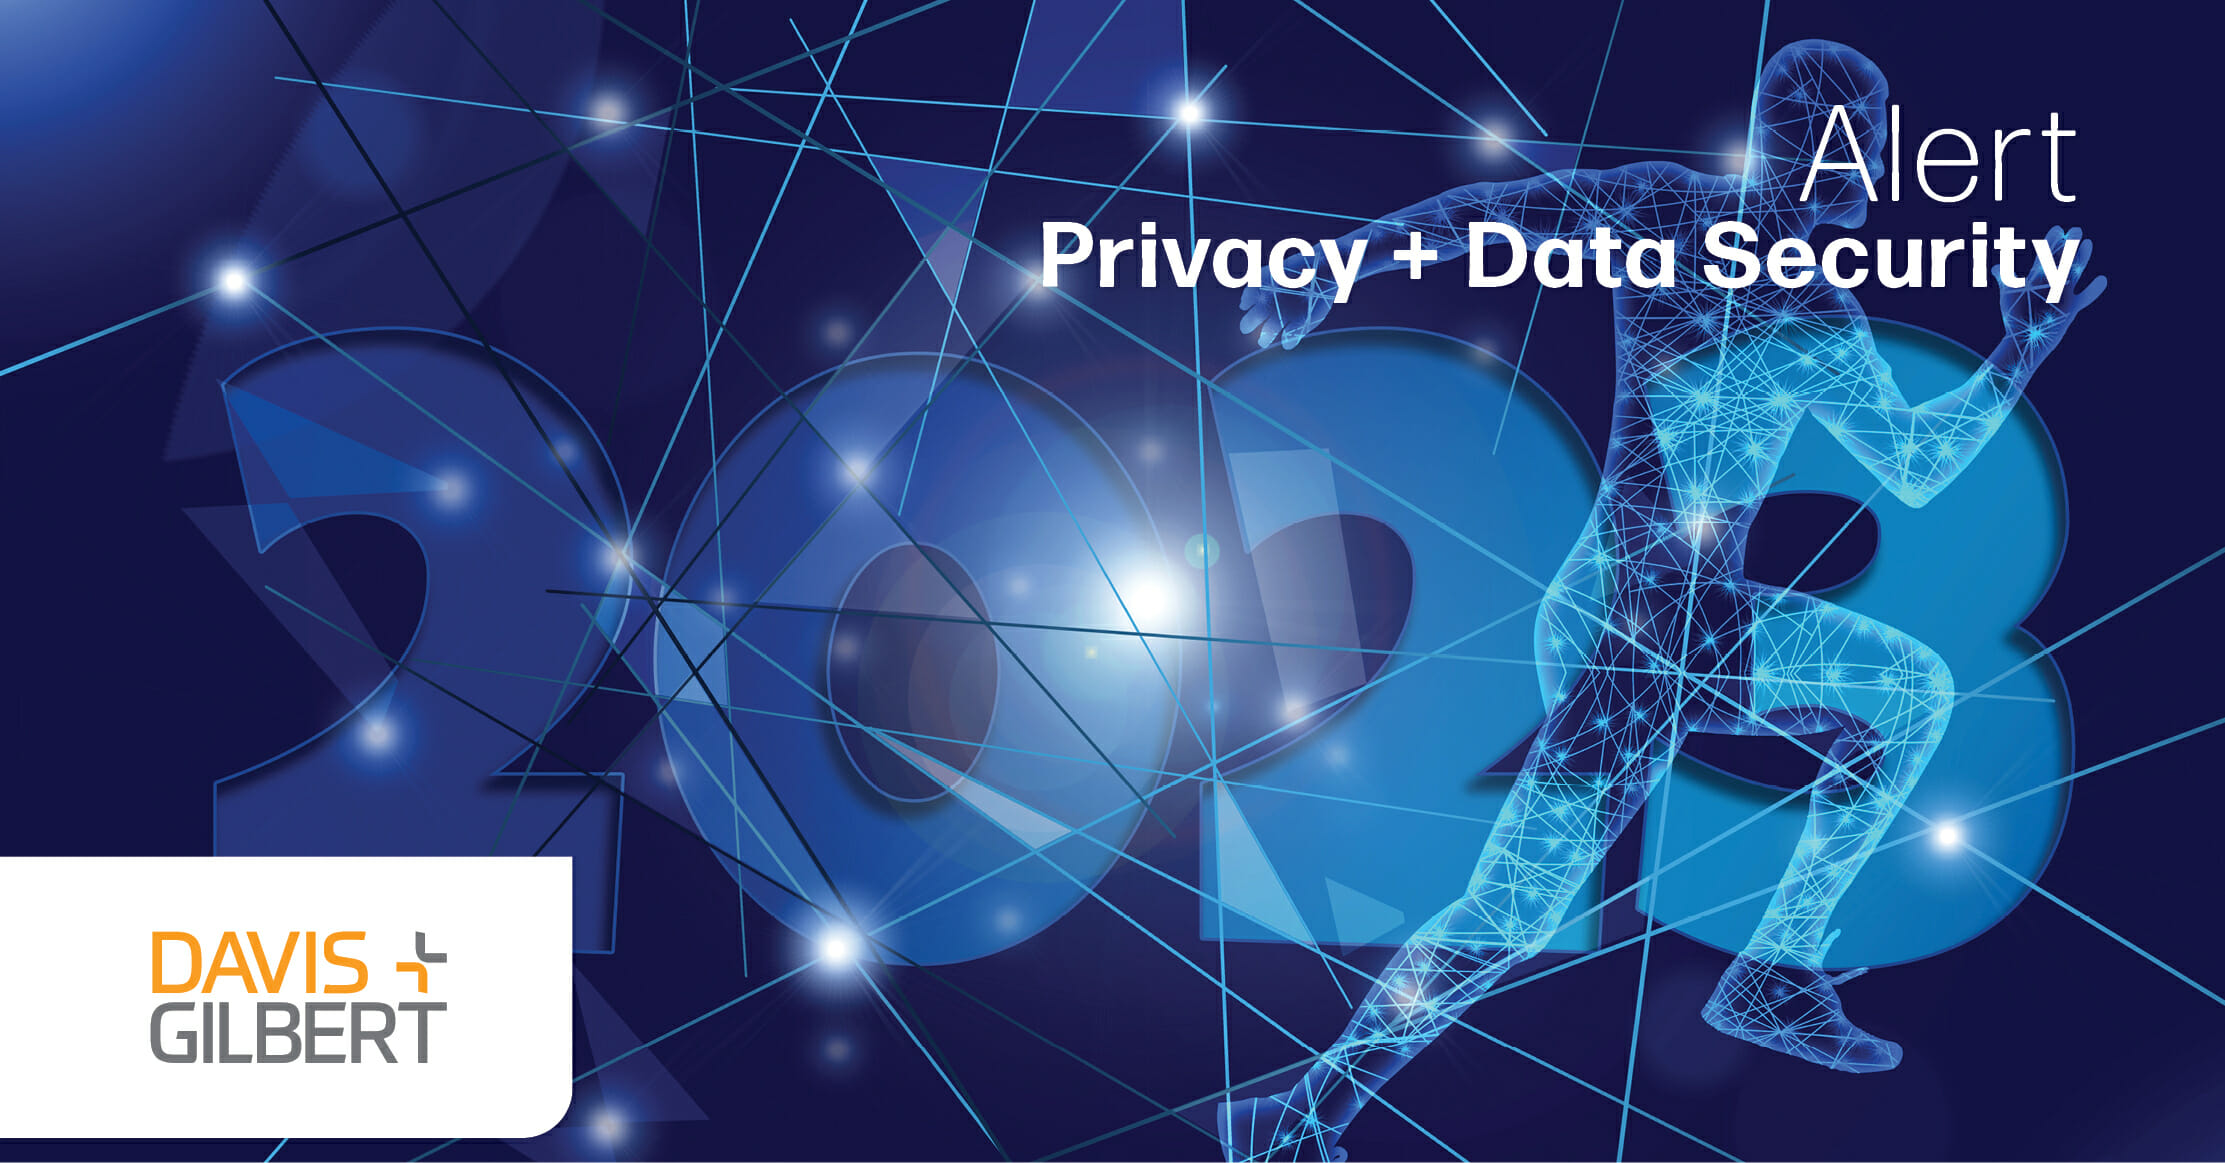 Global Privacy State of Play: What to Pay Attention to in 2023 – Best of  Privacy